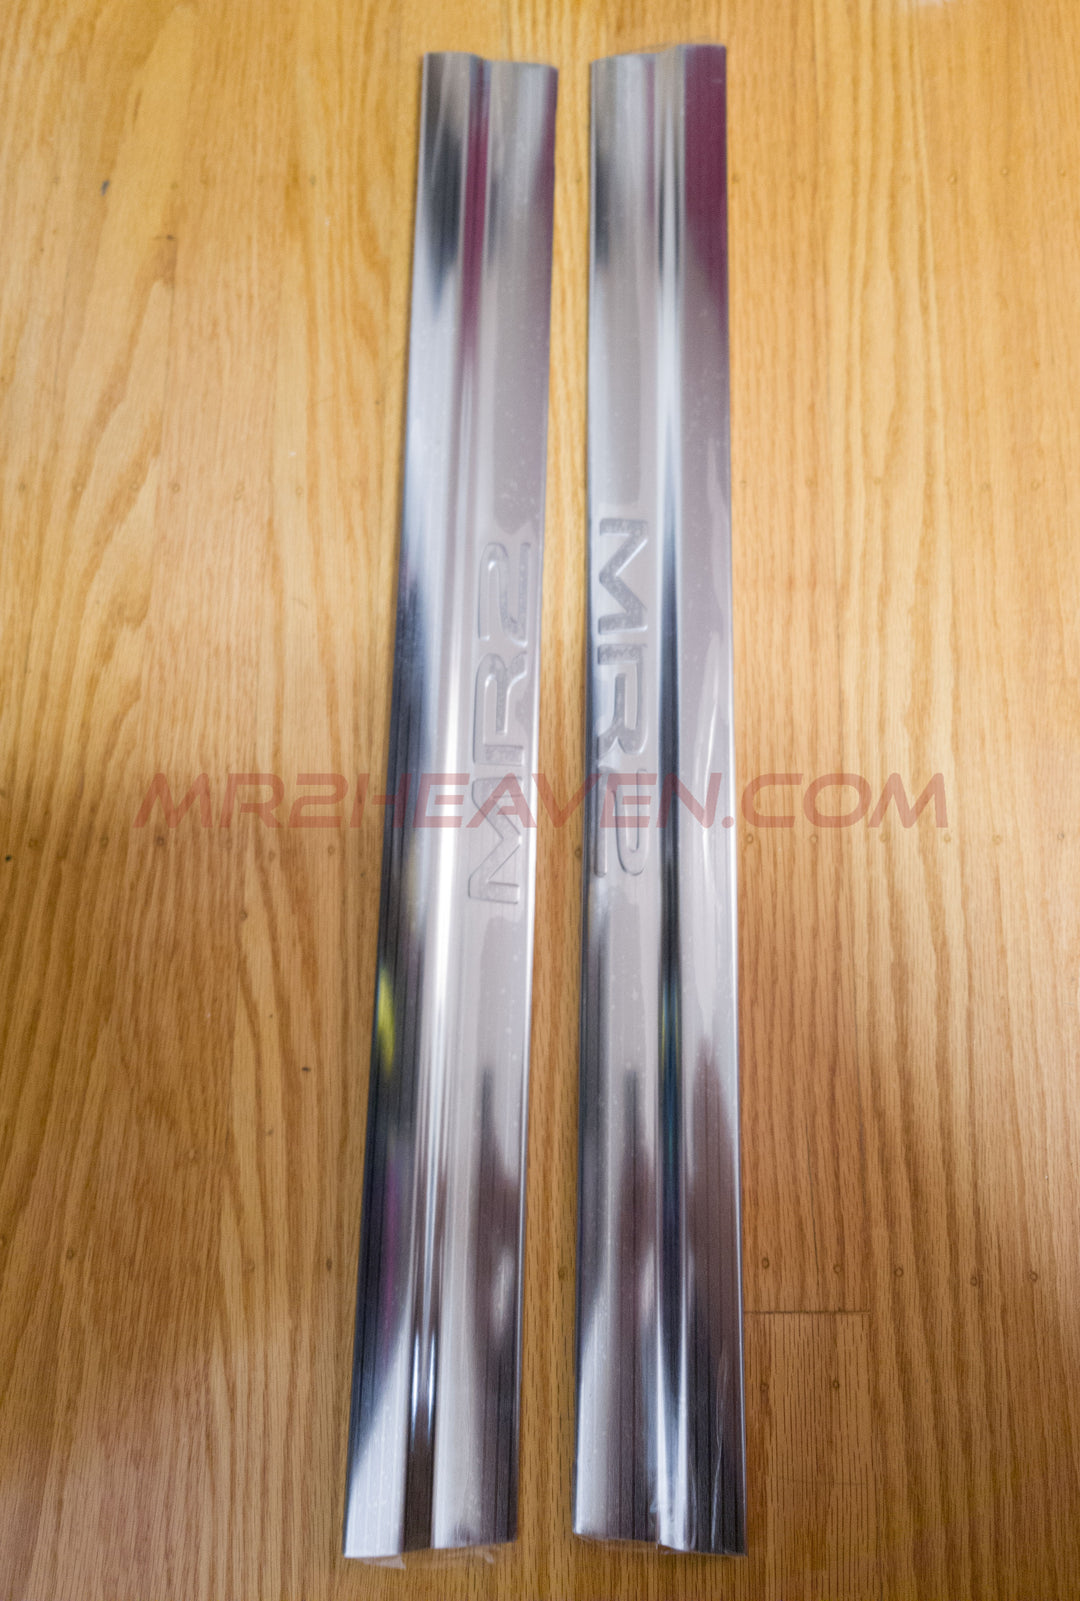 Stainless Steel SW20 MR2 Doorsill Plate Covers - MR2 Heaven